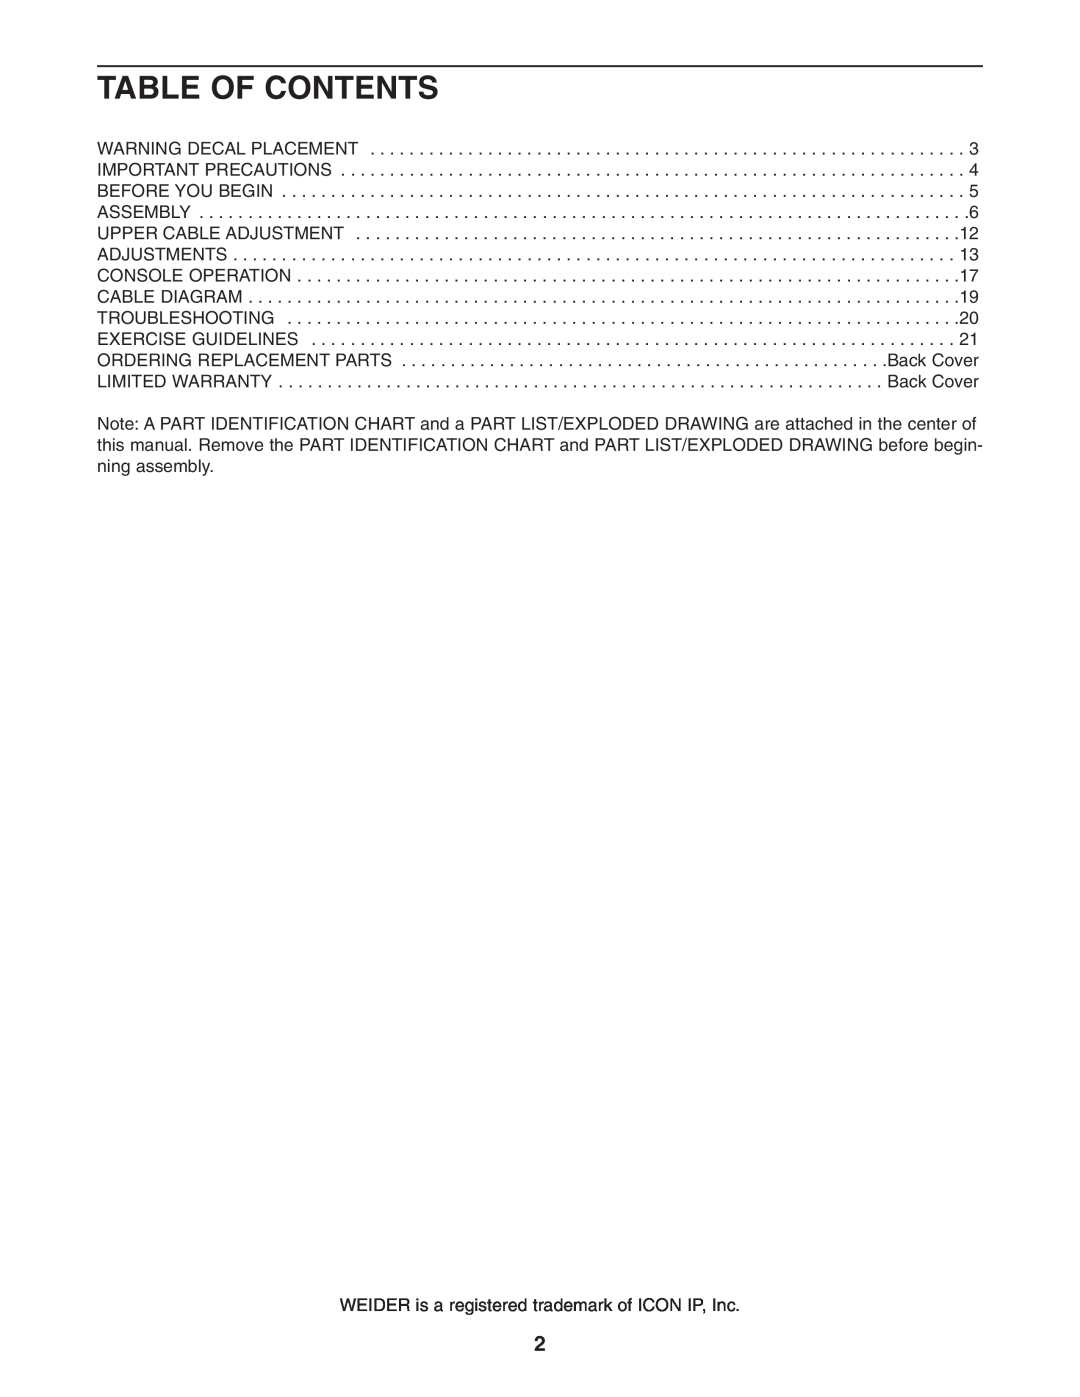 Weider WESY78734 user manual Table Of Contents, WEIDER is a registered trademark of ICON IP, Inc 